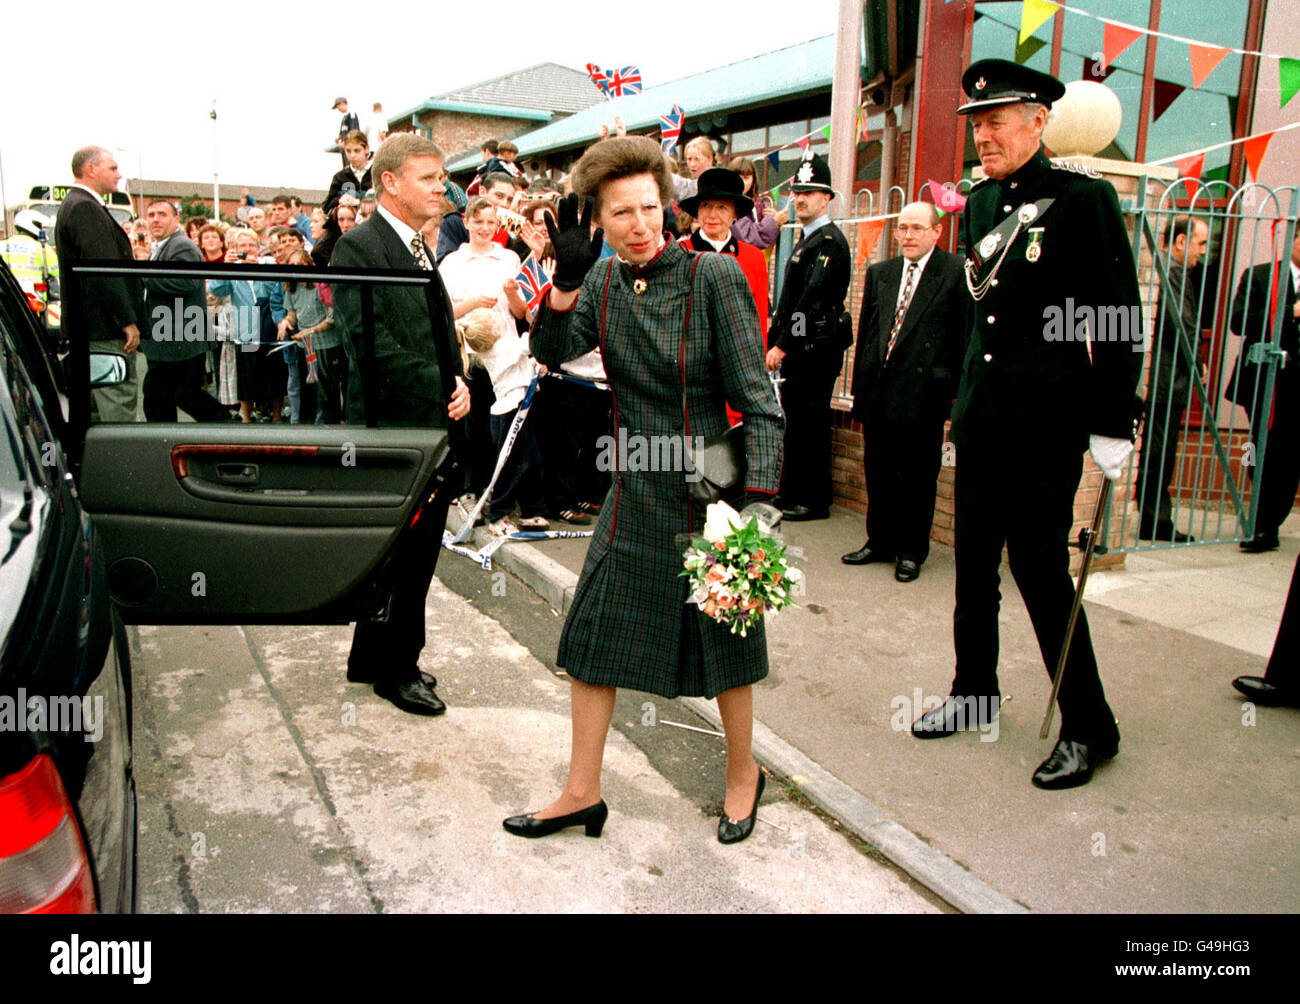 The Princess Royal waves to the crowds of wellwishers who turned out to greet her in Stockton, Cleveland, where she officially opened the Forge Community Centre. Stock Photo